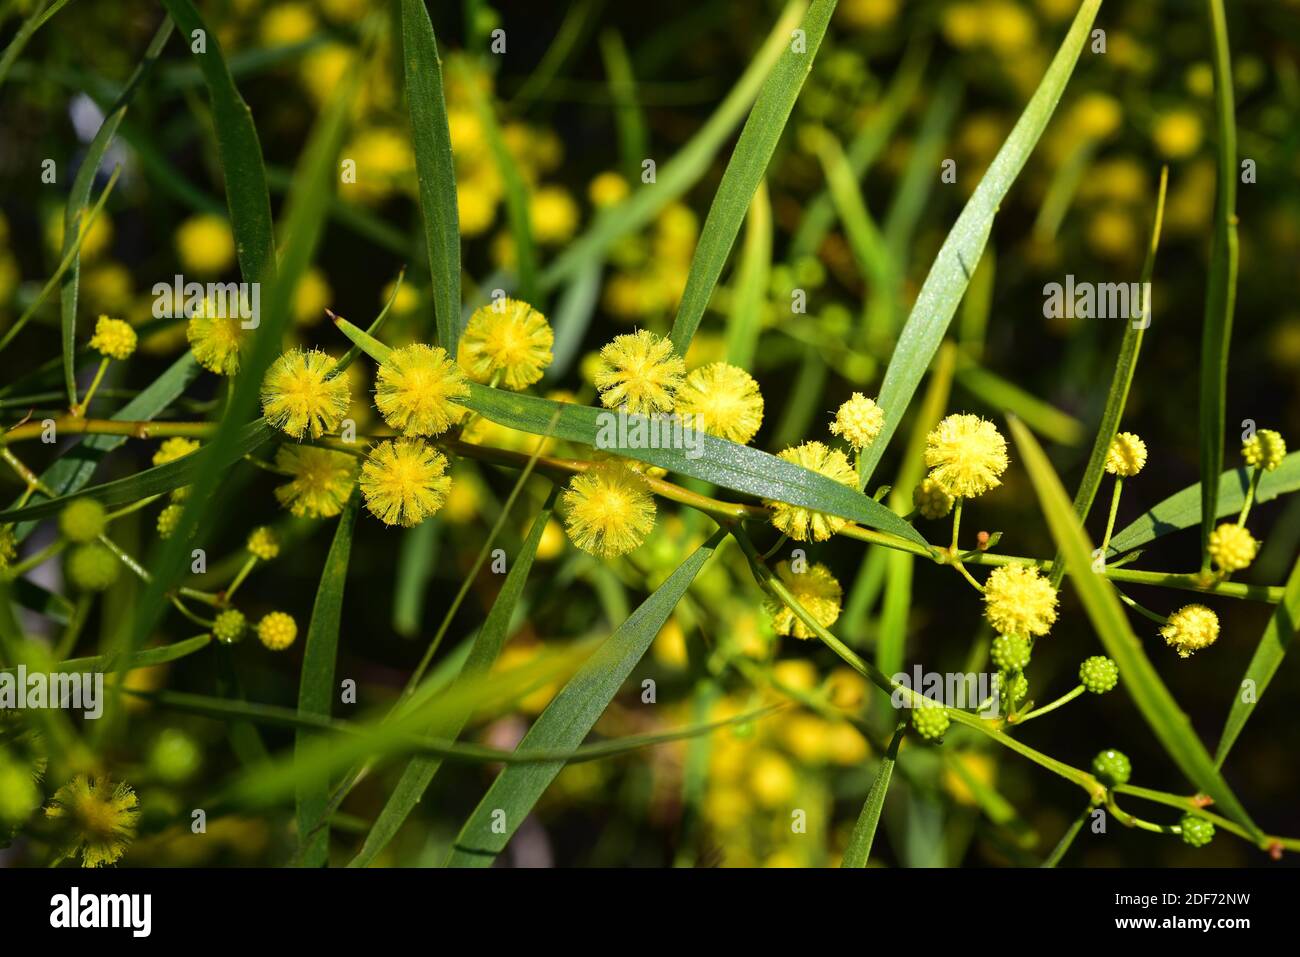 Sticky wattle or hope leaved wattle (Acacia dodonaeifolia) is a shrub native to Australia. Flowers and leaves (phyllodes) detail. Stock Photo